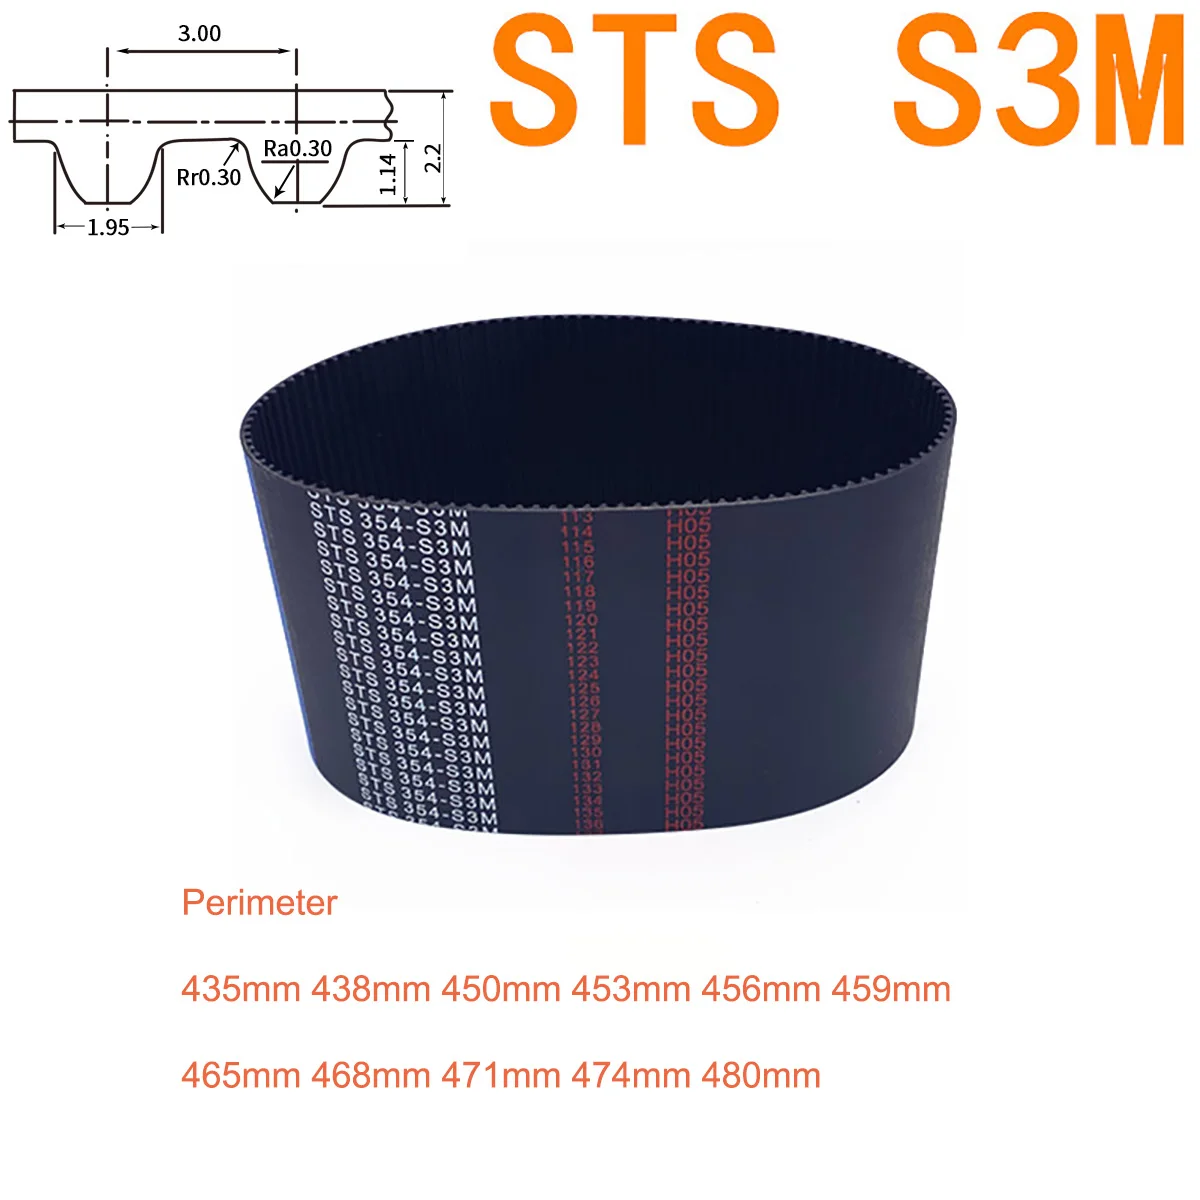 

1Pc S3M Timing Belt 435 438 450 453 456 459 465 468 471 474 480mm Width 6/10/15/20mm STS S3M Closed-loop Synchronous Rubber Belt